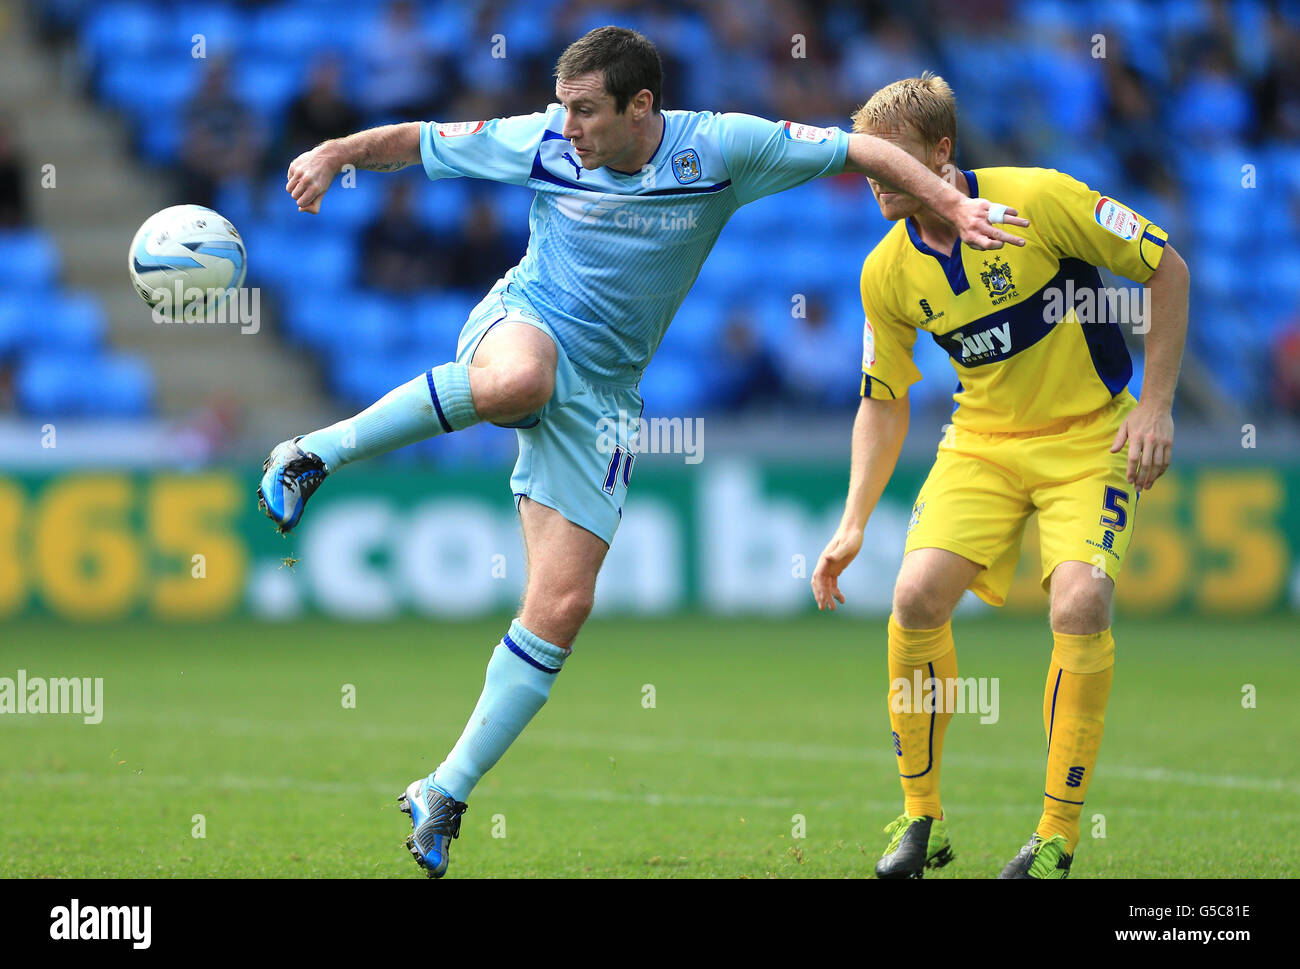 Coventry City's Stephen Elliott and Bury's Adam Lockwood (right) in action during the npower Football League One match at the Ricoh Arena, Coventry. Stock Photo